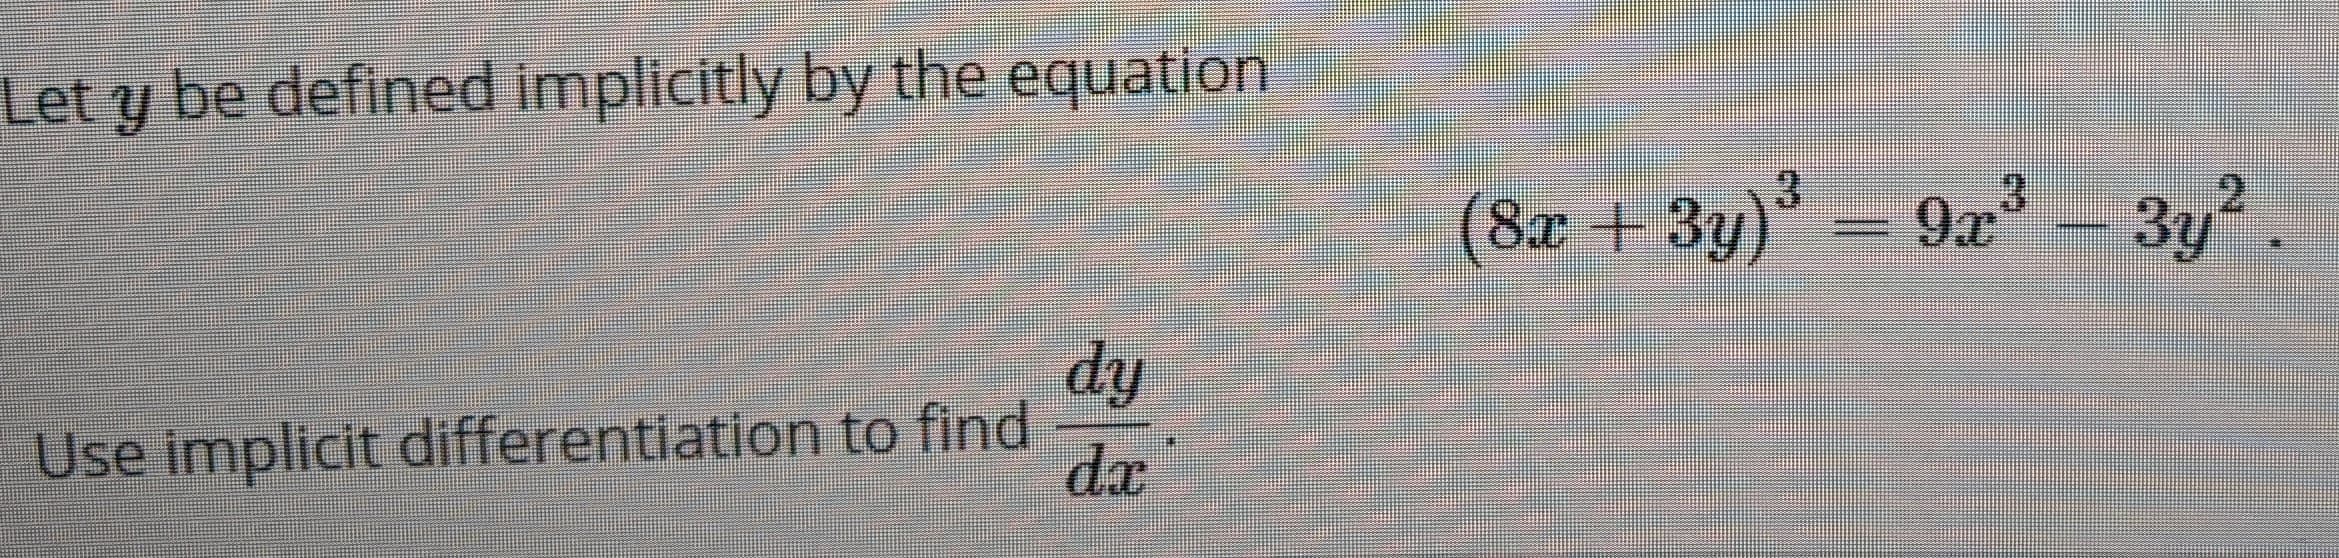 Let y be defined implicitly by the equation
(8x+3y)
9a- 3y2
dy
Use implicit differentiation to find
da
